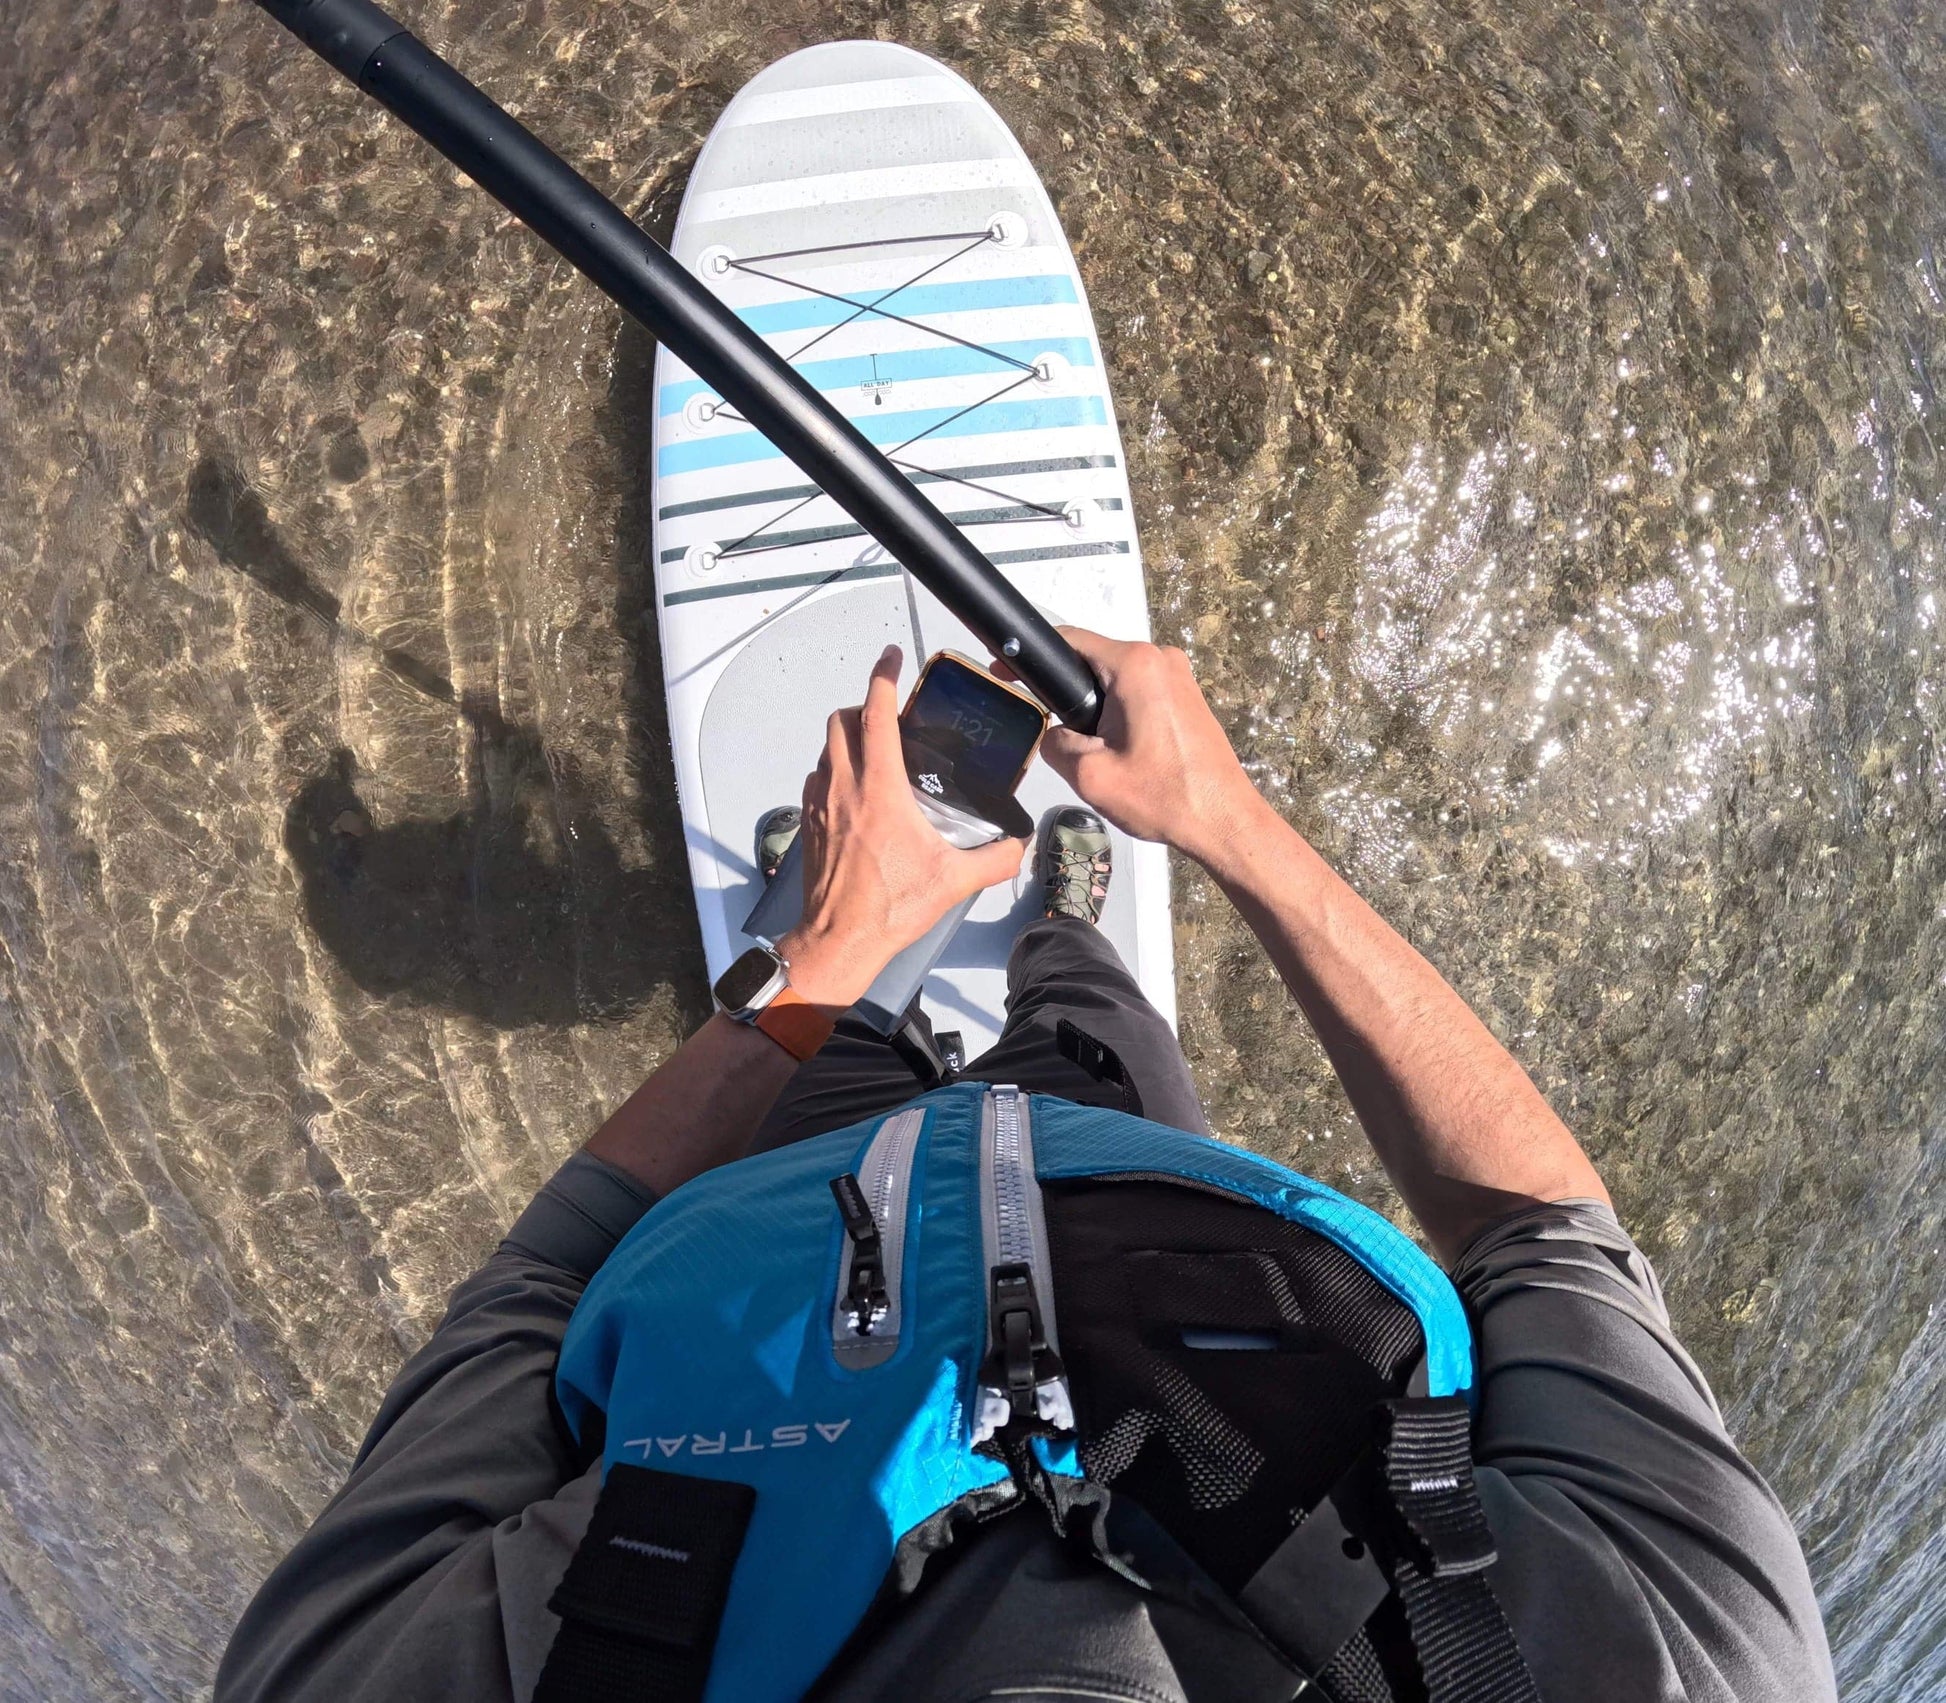 using a floating phone case on a stand up paddle board